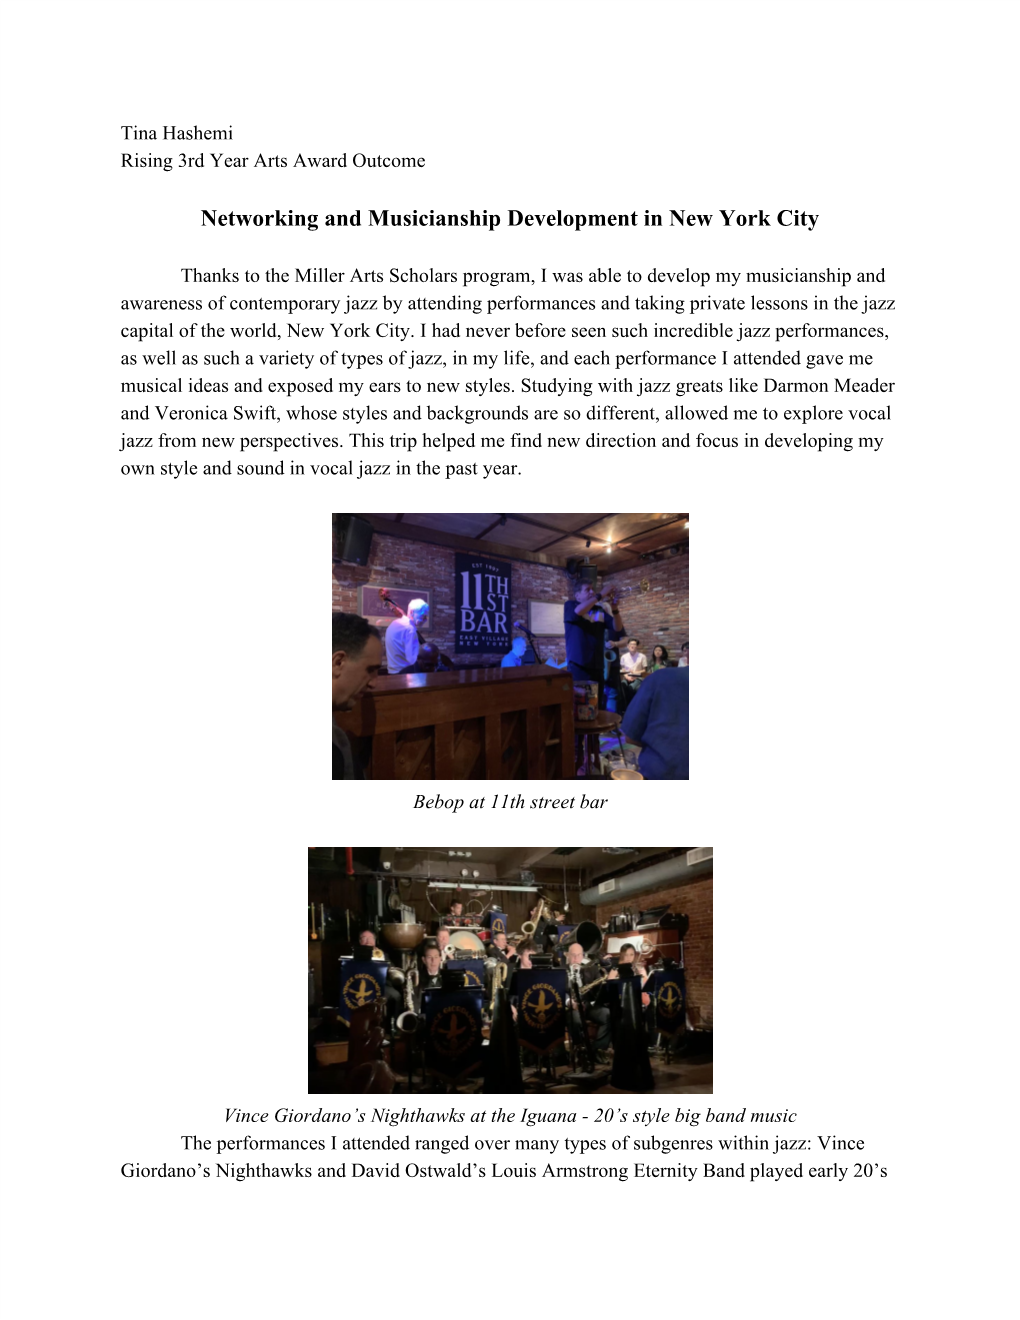 Networking and Musicianship Development in New York City